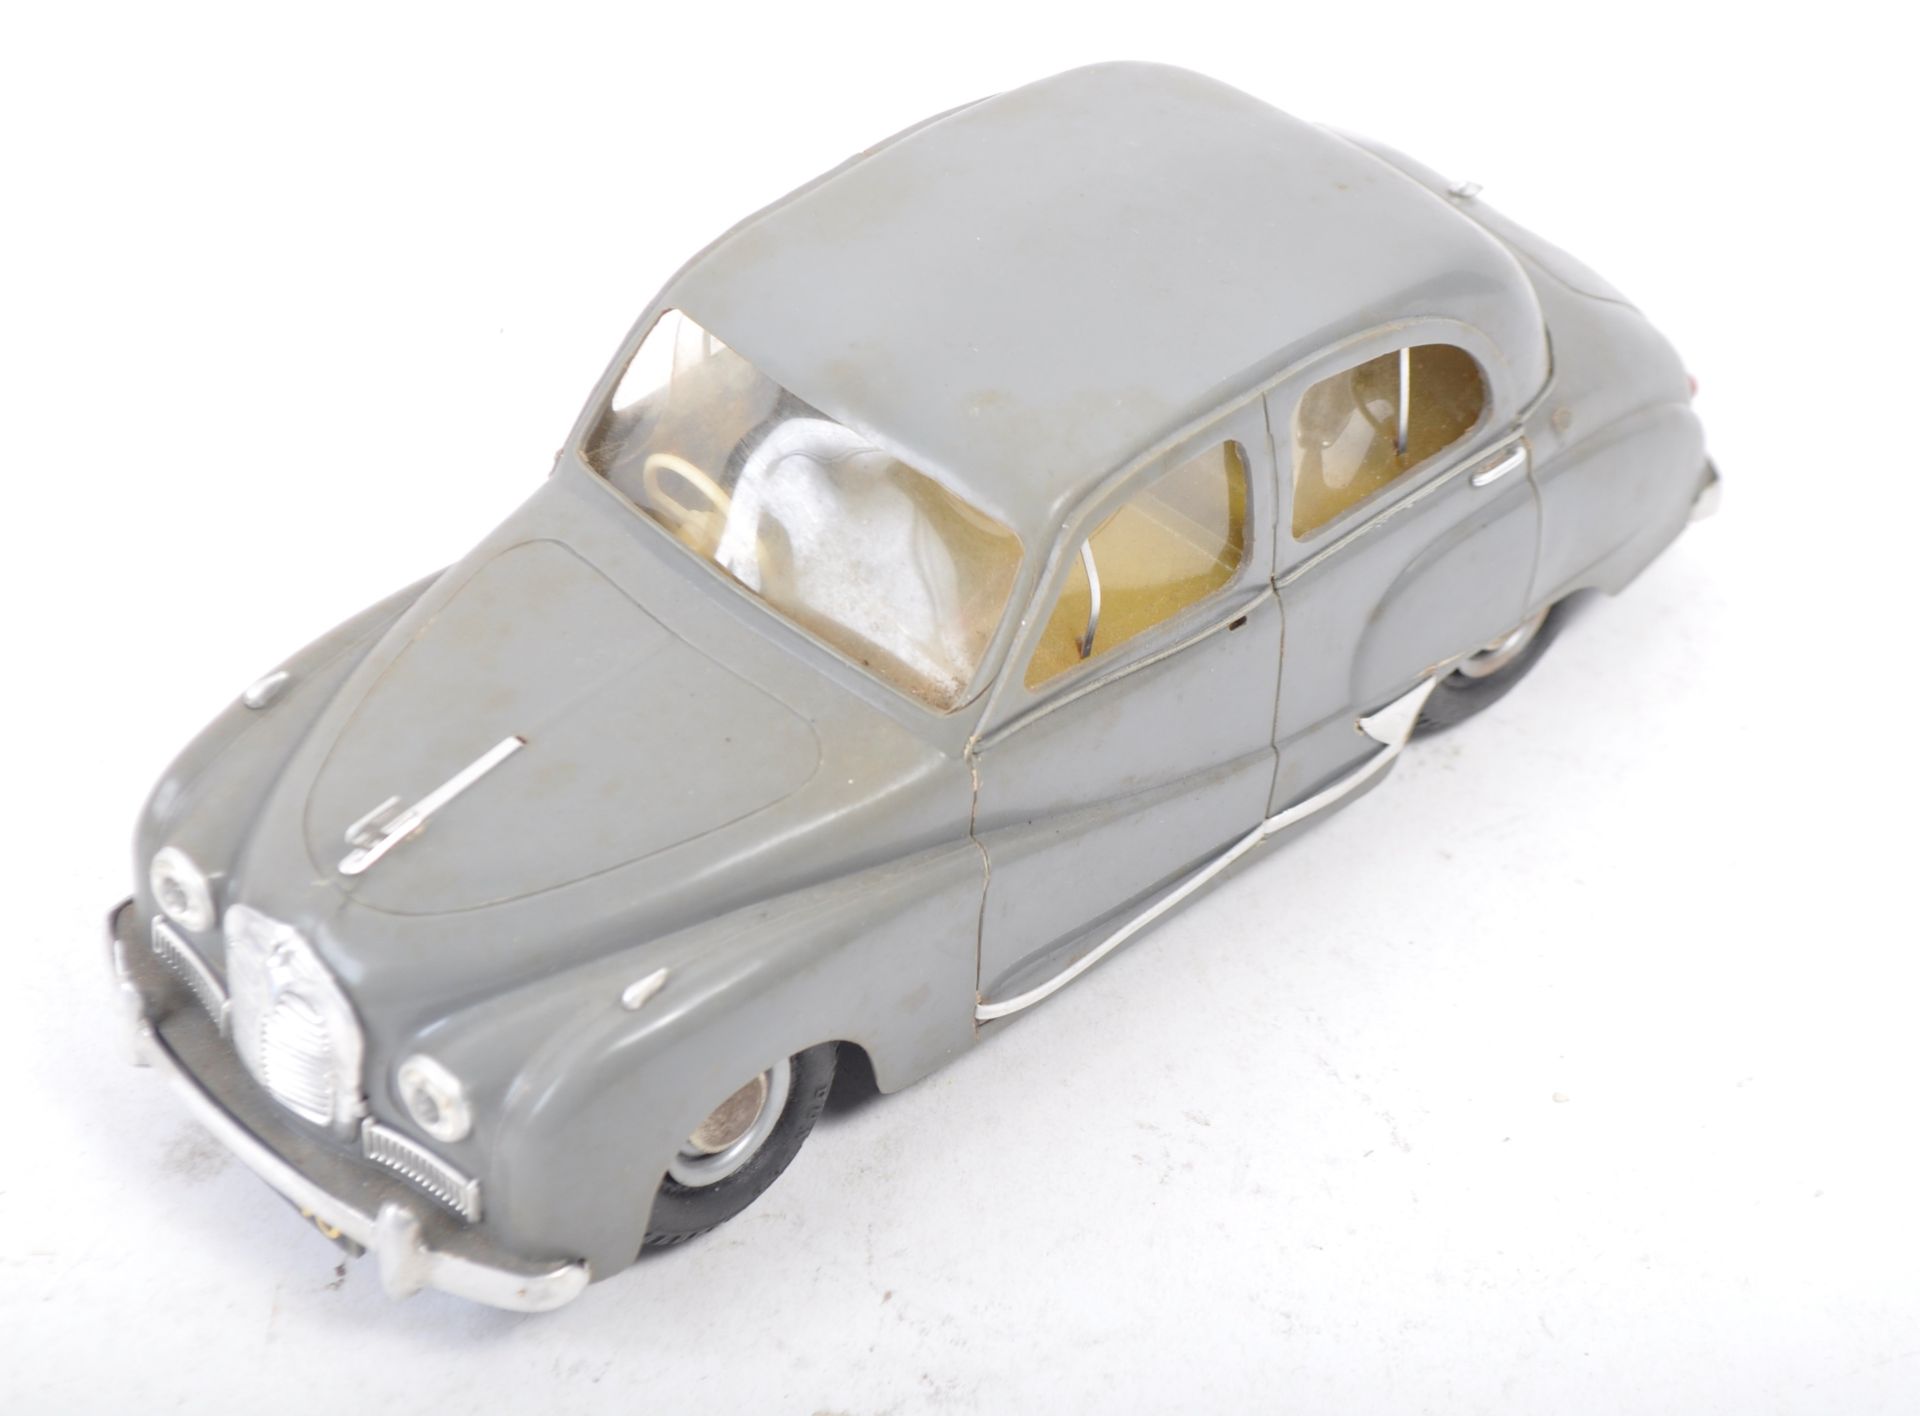 VICTORY INDUSTRIES MADE 1/18 SCALE AUSTIN A40 SOMERSET MODEL - Image 2 of 7